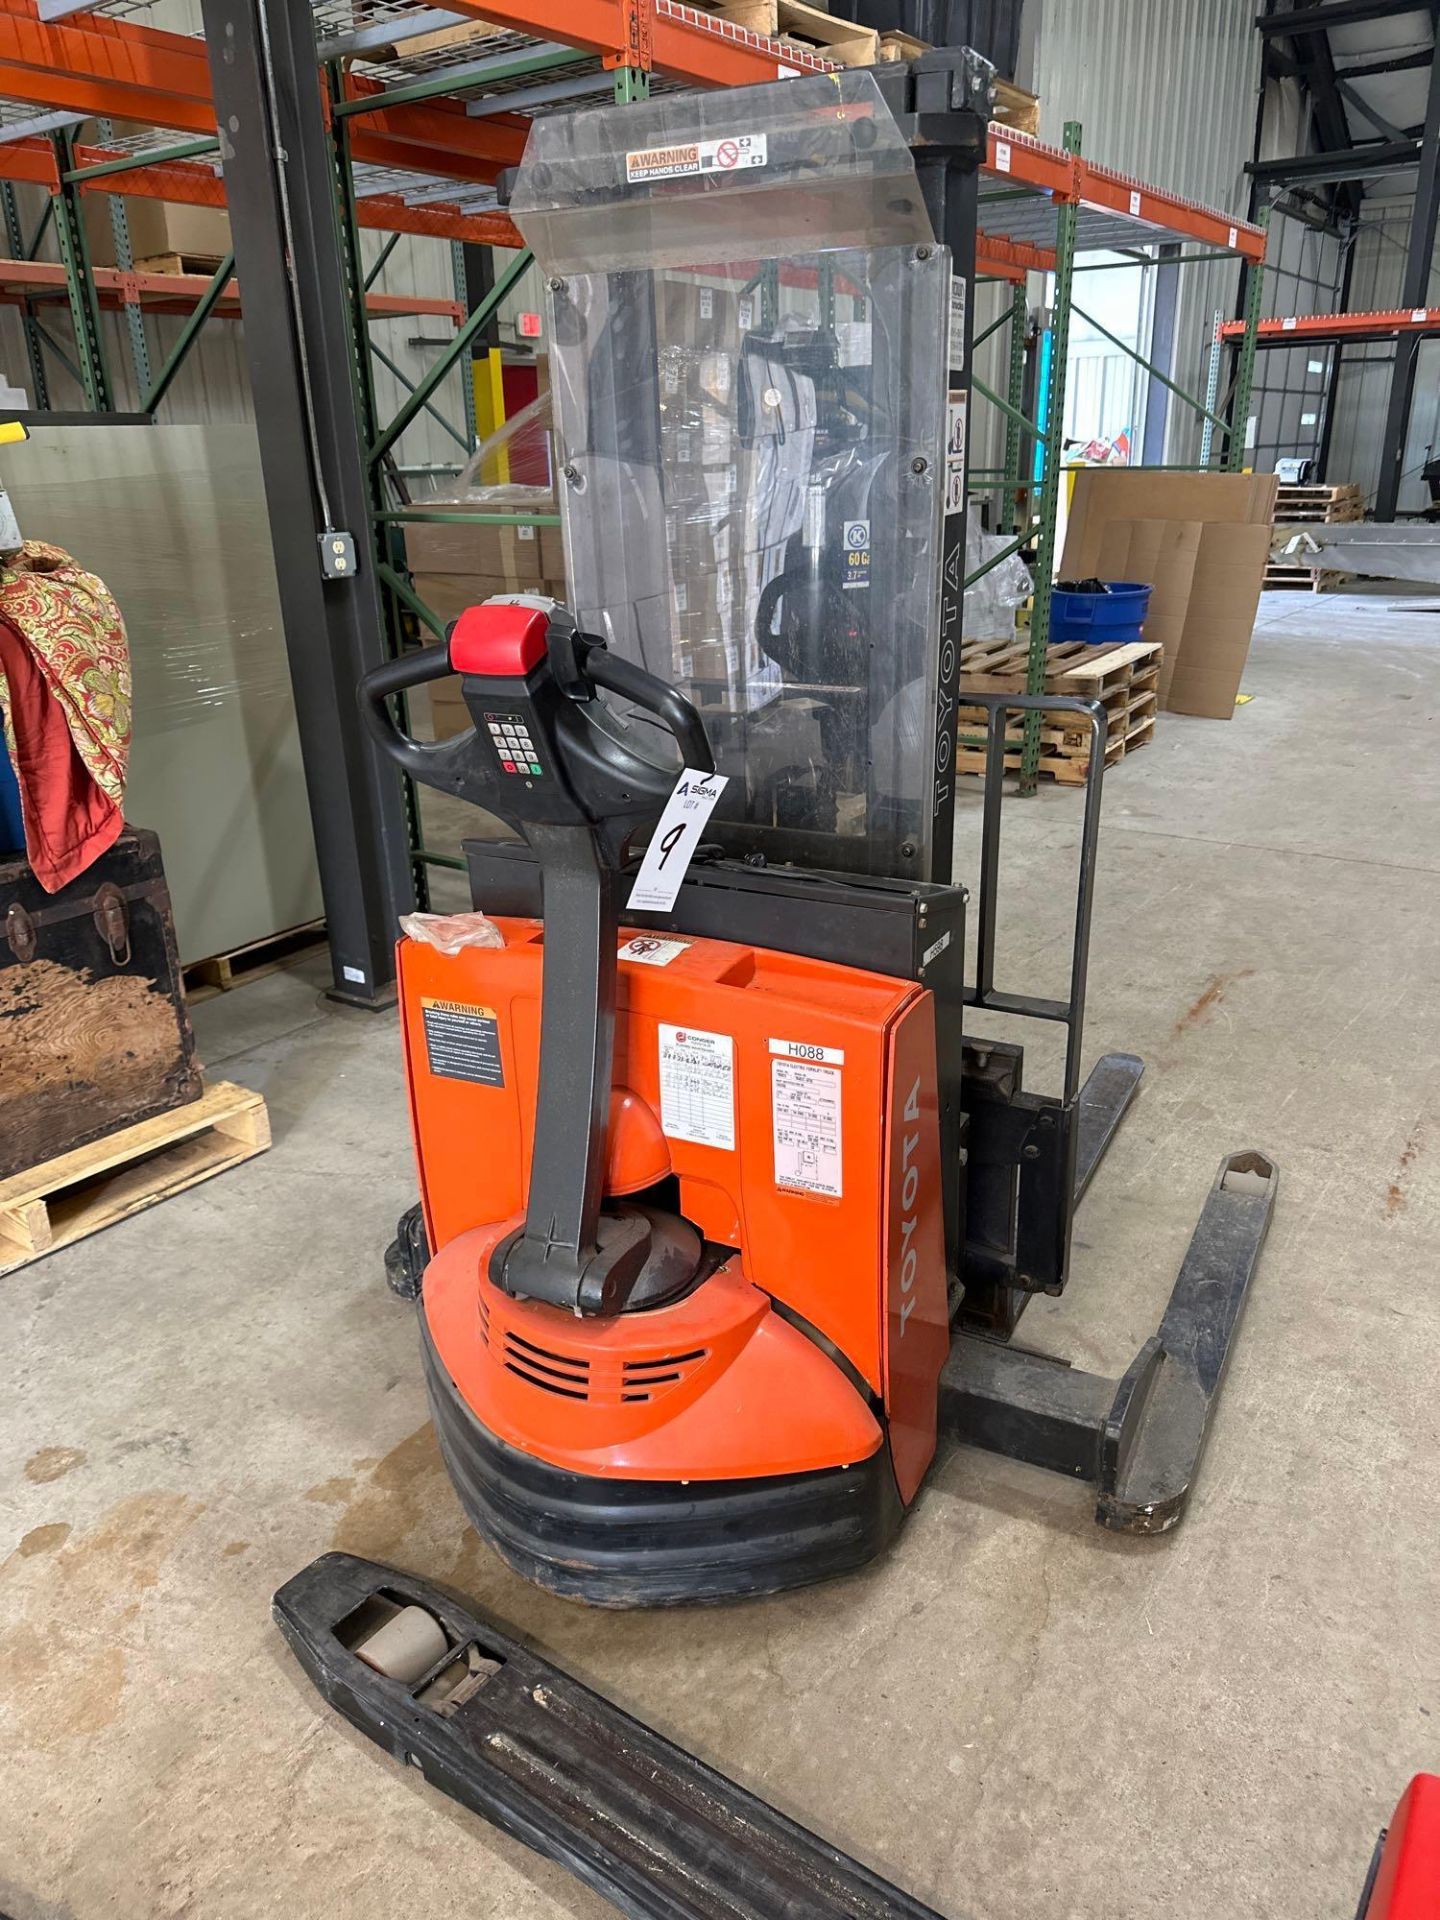 Toyota Electric Forklift Truck 7BWS10